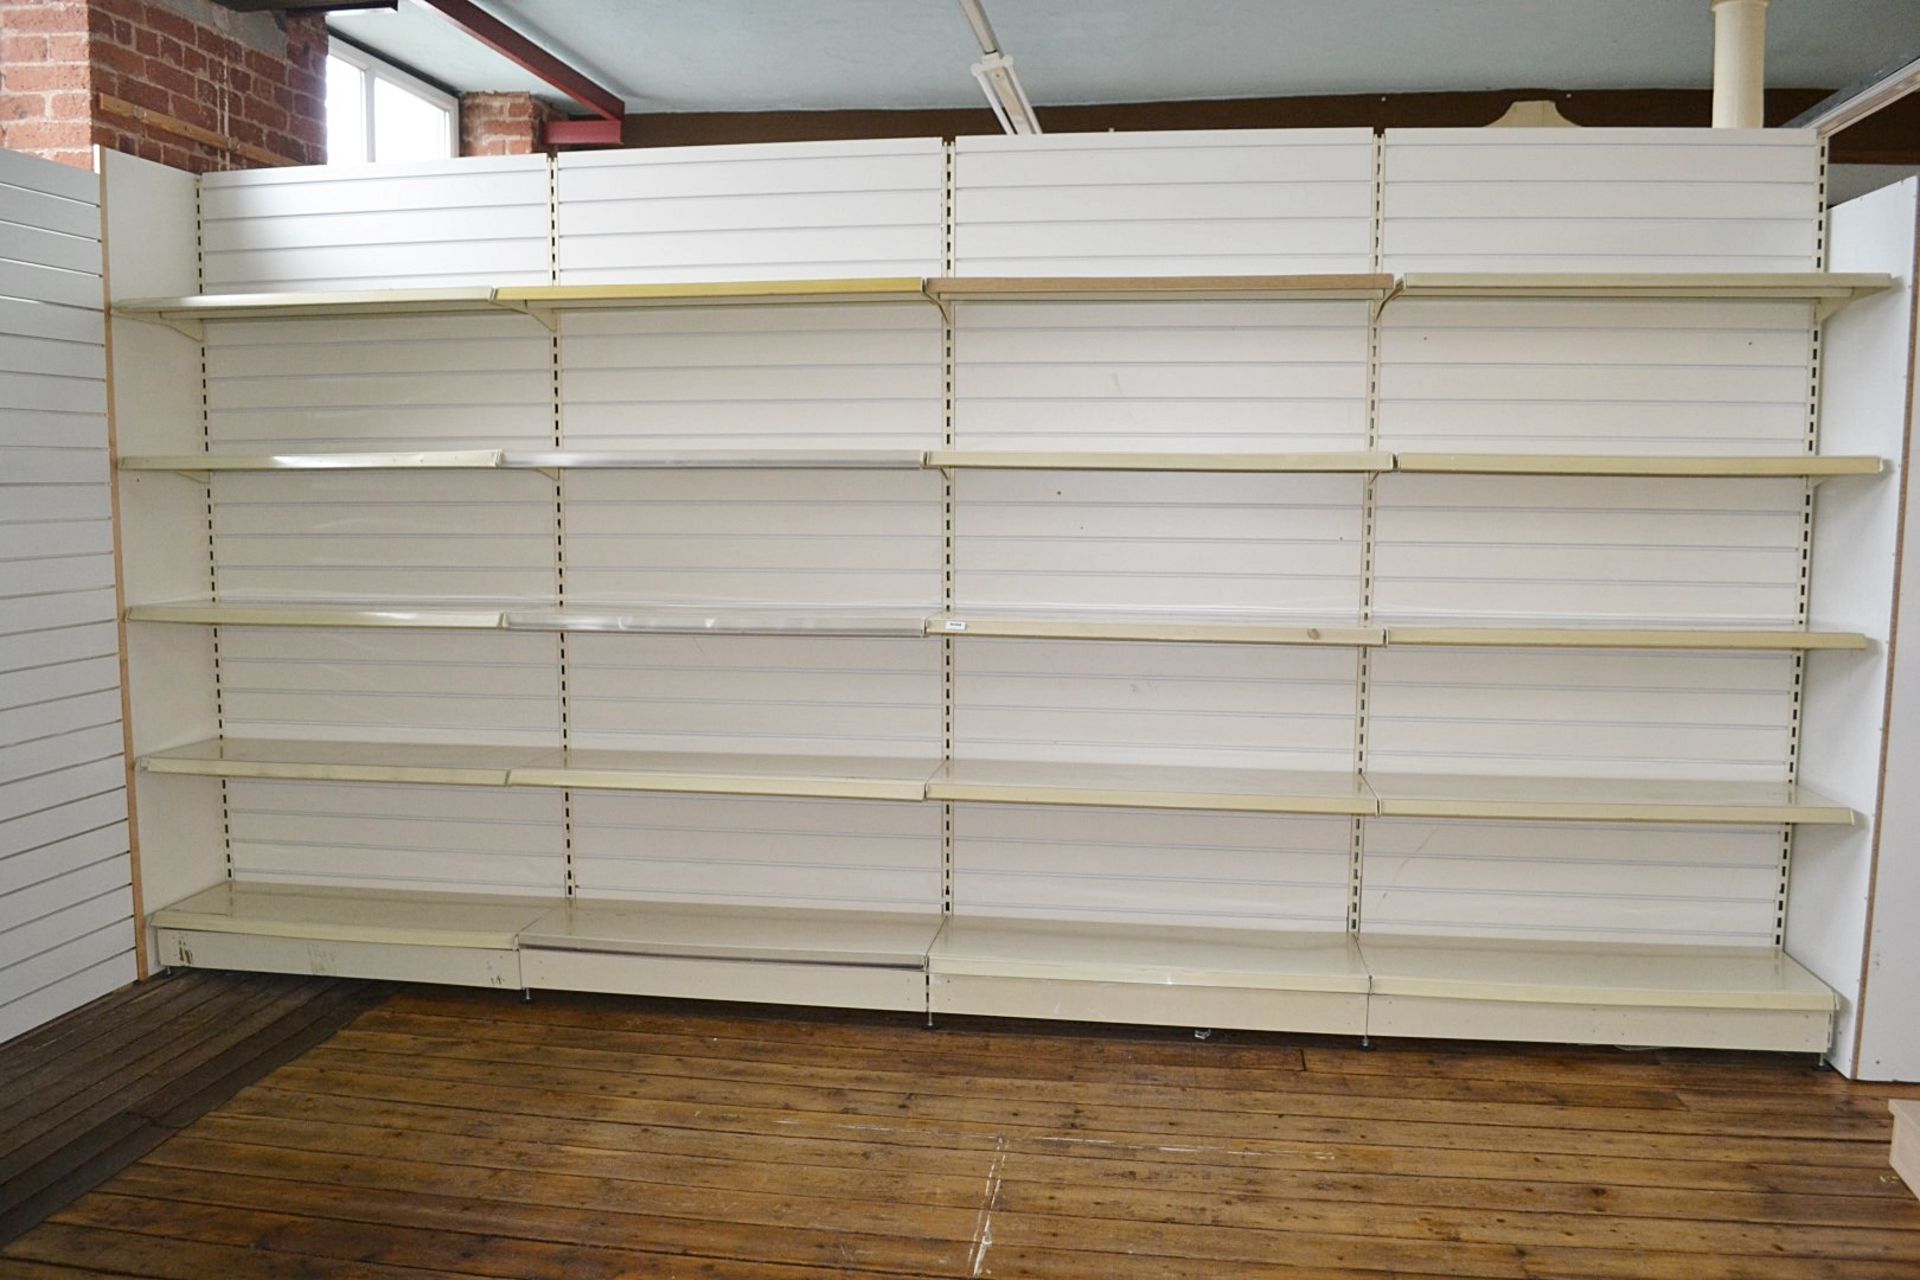 1 x Slatwall With Shelving - Approx. Total Dimensions: W480cm x H249cm - Buyer To Remove